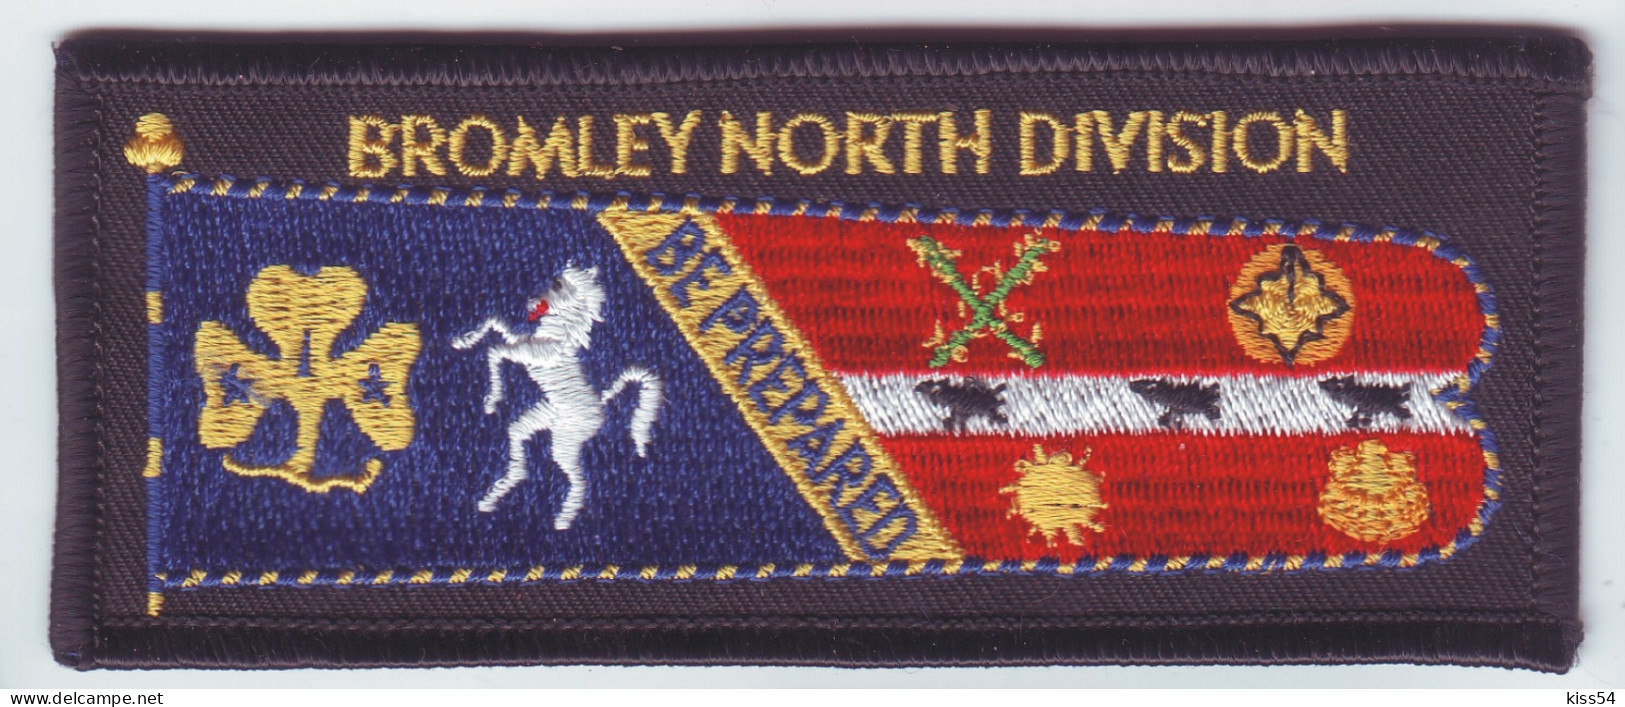 B 22 - 77 UK Scout Badge - Bromley North Division - Scouting